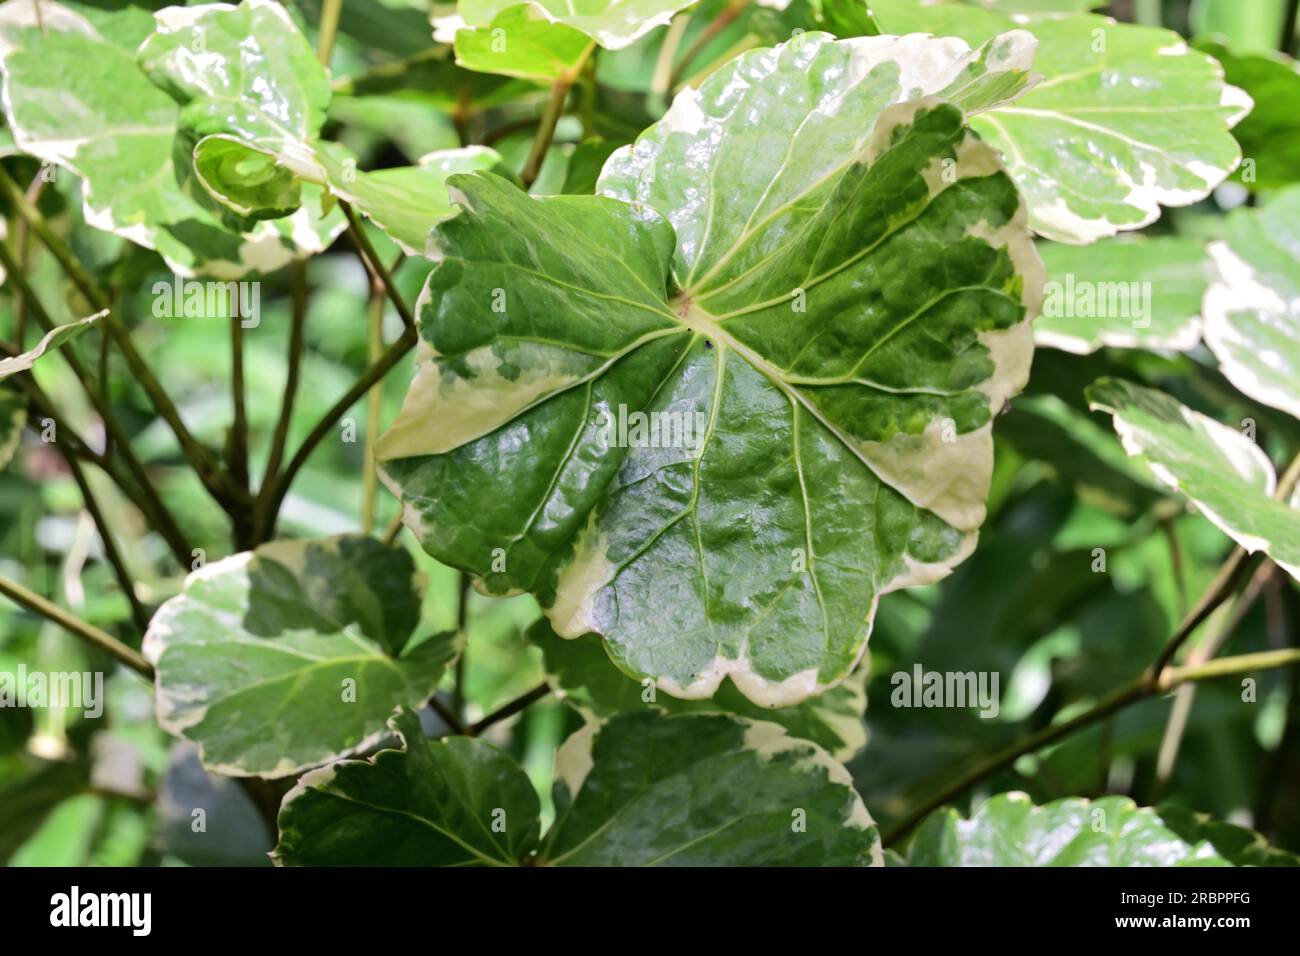 Close up view of a variegated leaf of a Dinner plate Aralia (Polyscias Balfouriana) plant Stock Photo